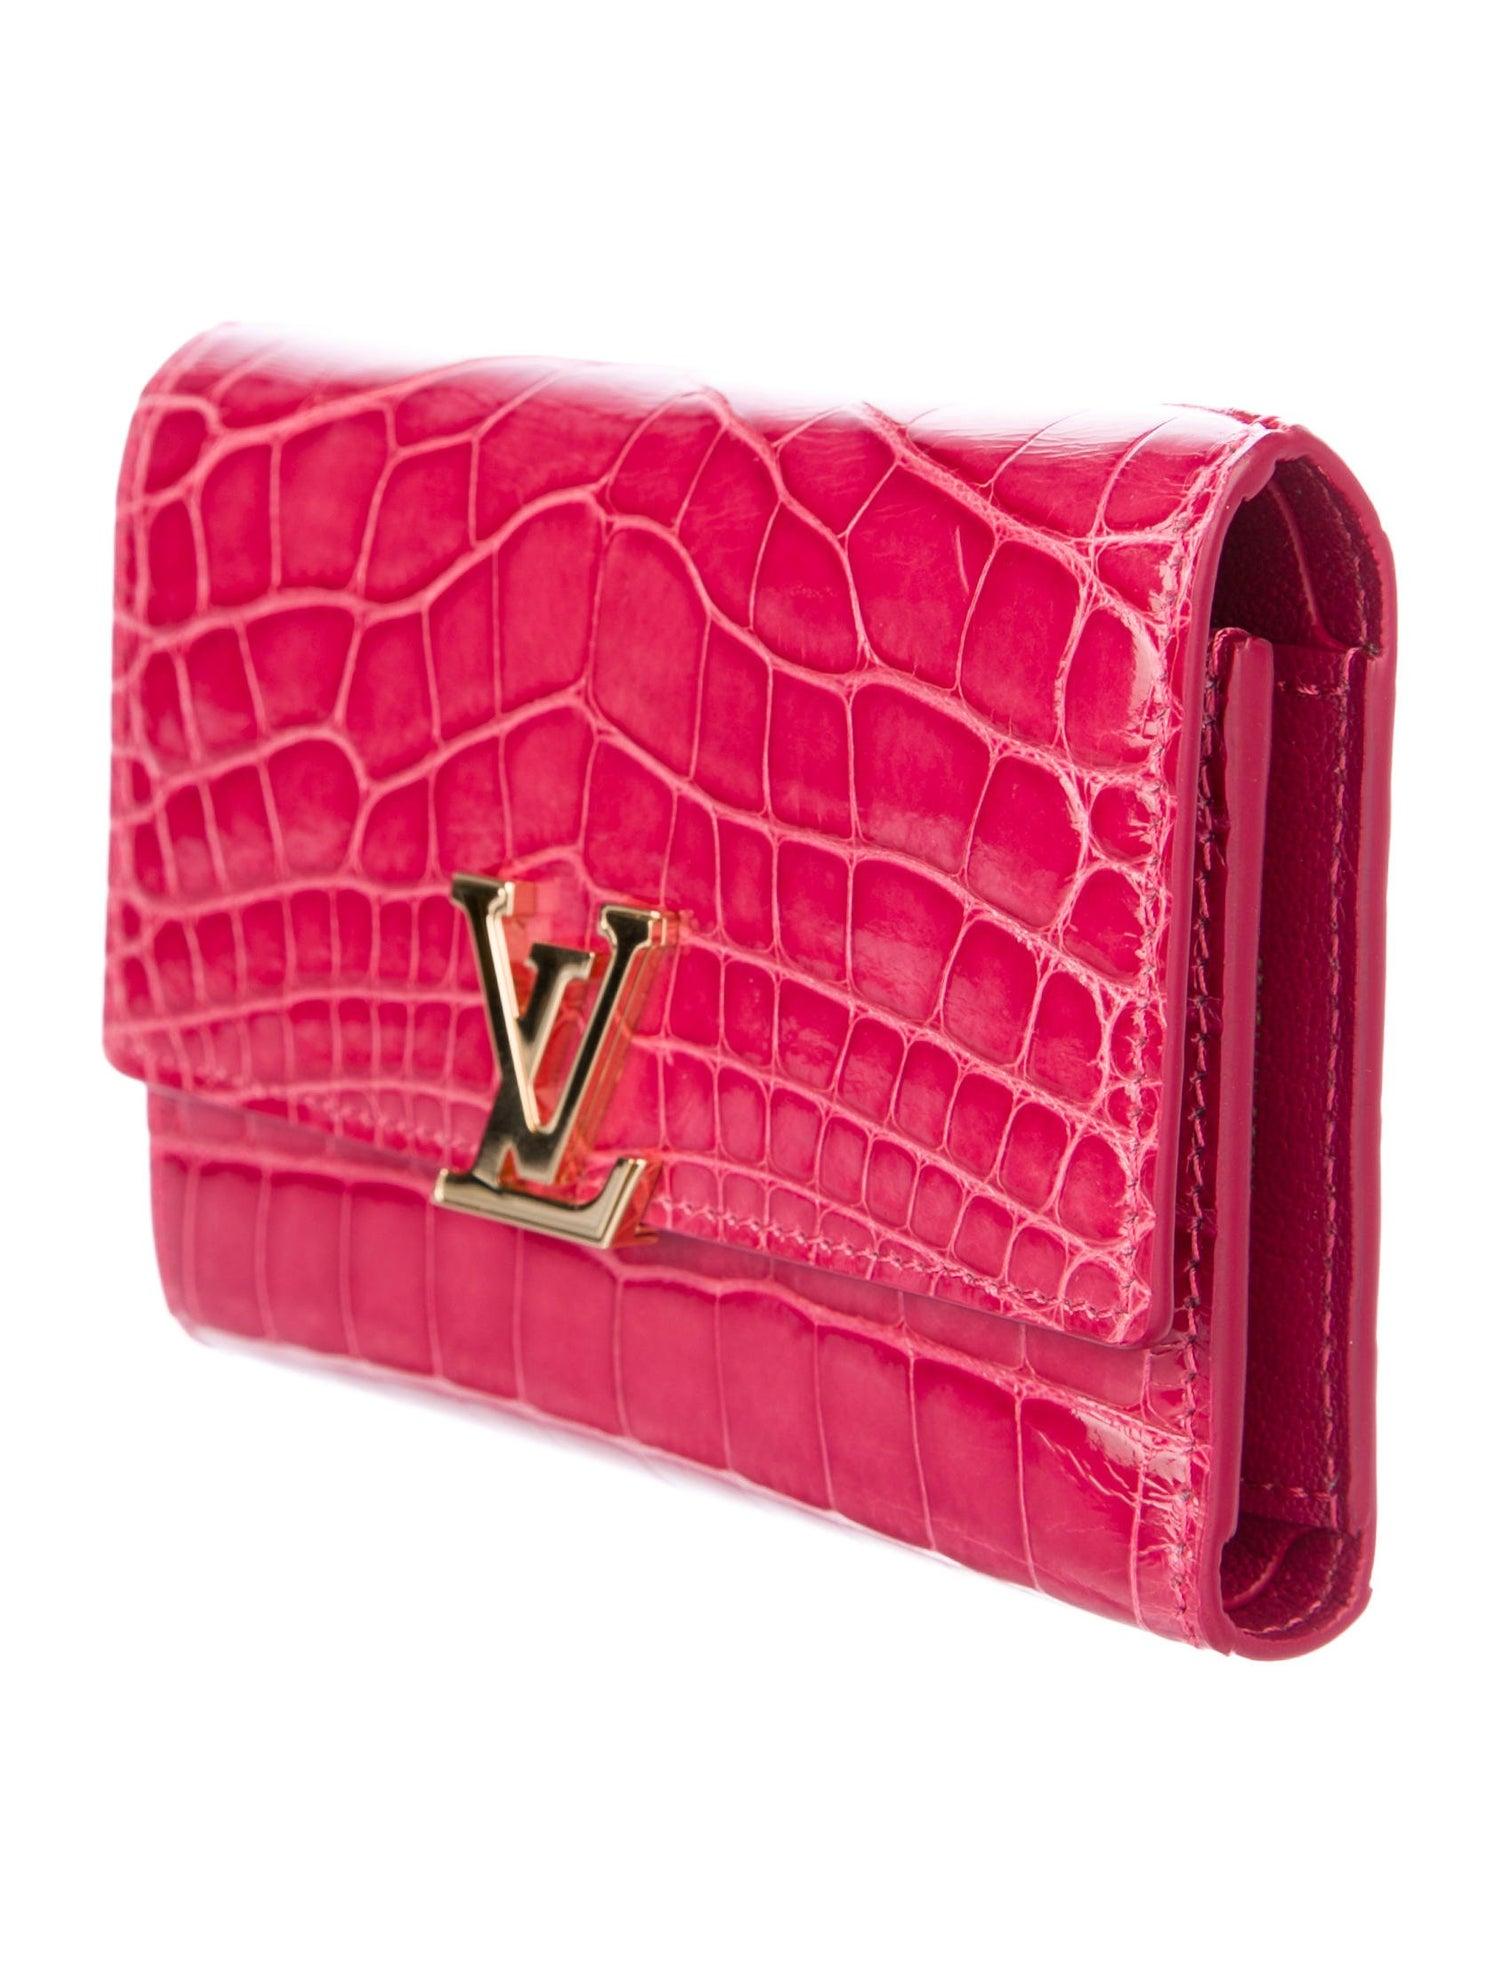 Louis Vuitton NEW Pink Alligator Exotic Gold Charm Small Clutch Wallet in Box

Alligator 
Brass hardware
Leather lining,
Features eight card slots
Snap closure
Date code present
Made in France
Measures 5.25